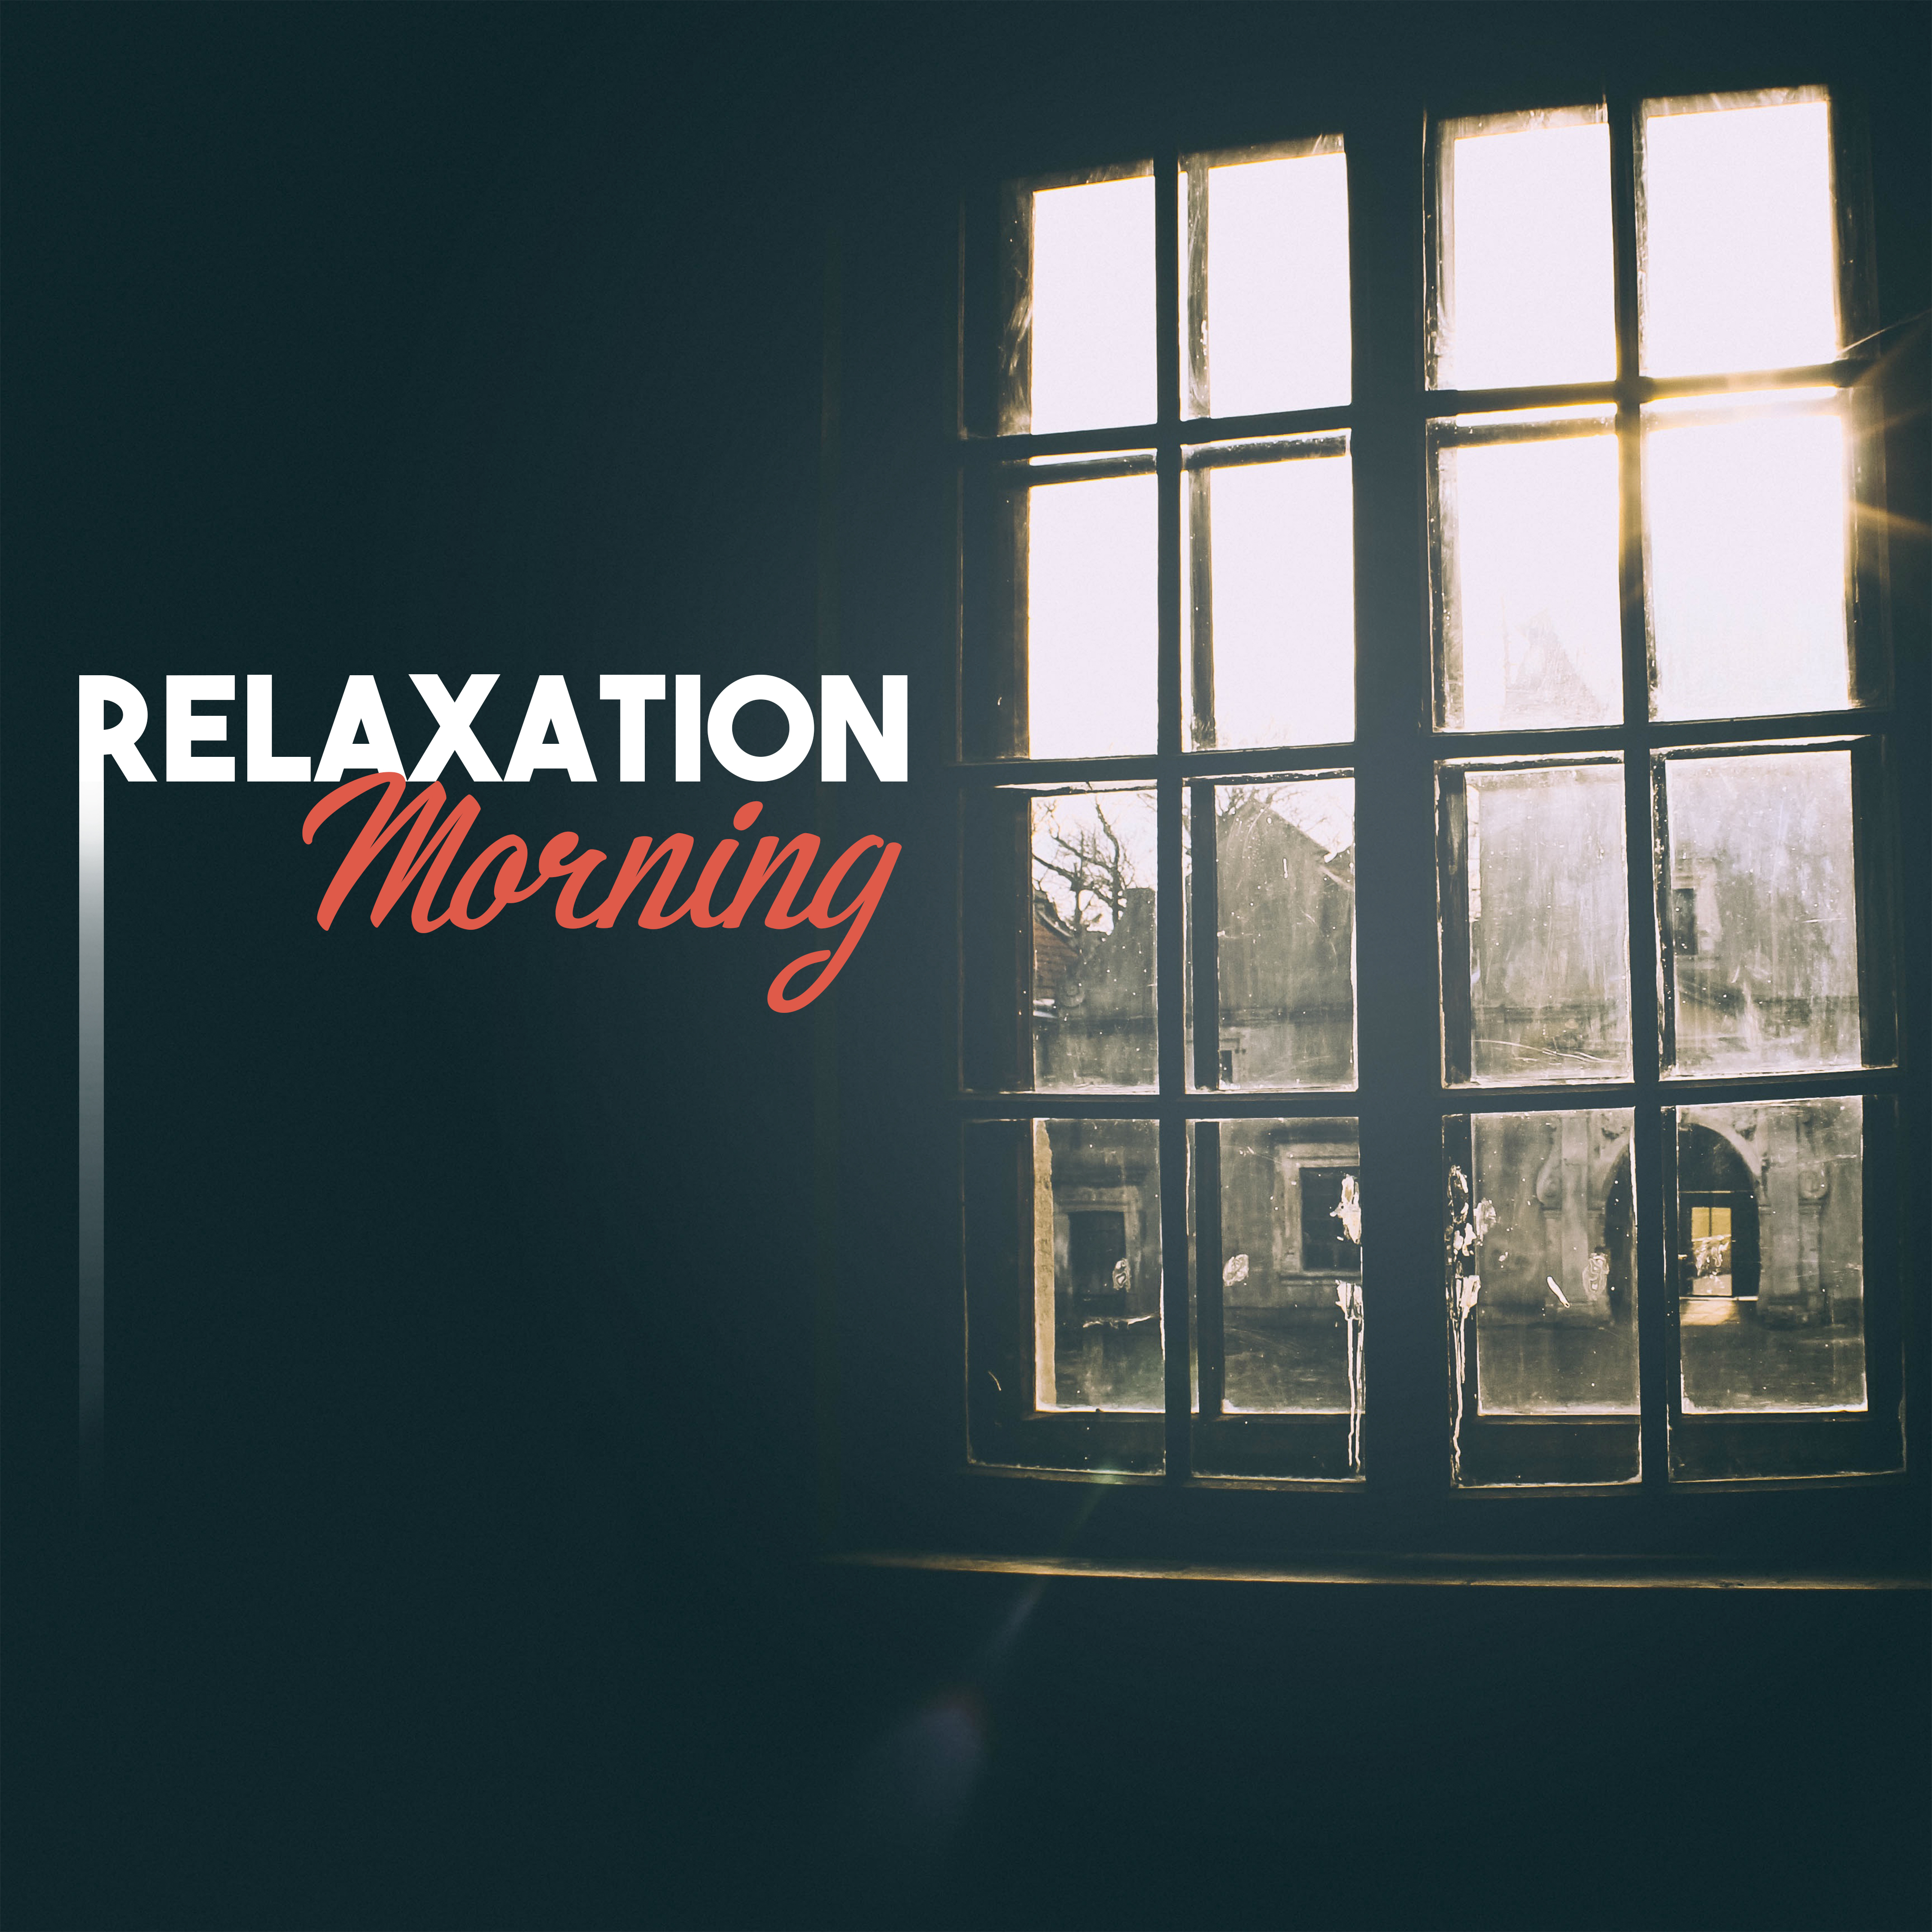 Relaxation Morning – Jazz Cafe, Instrumental Sounds for Rest, Best Background to Cafe, Mellow Jazz, Deep Relaxation, Music for Restaurant